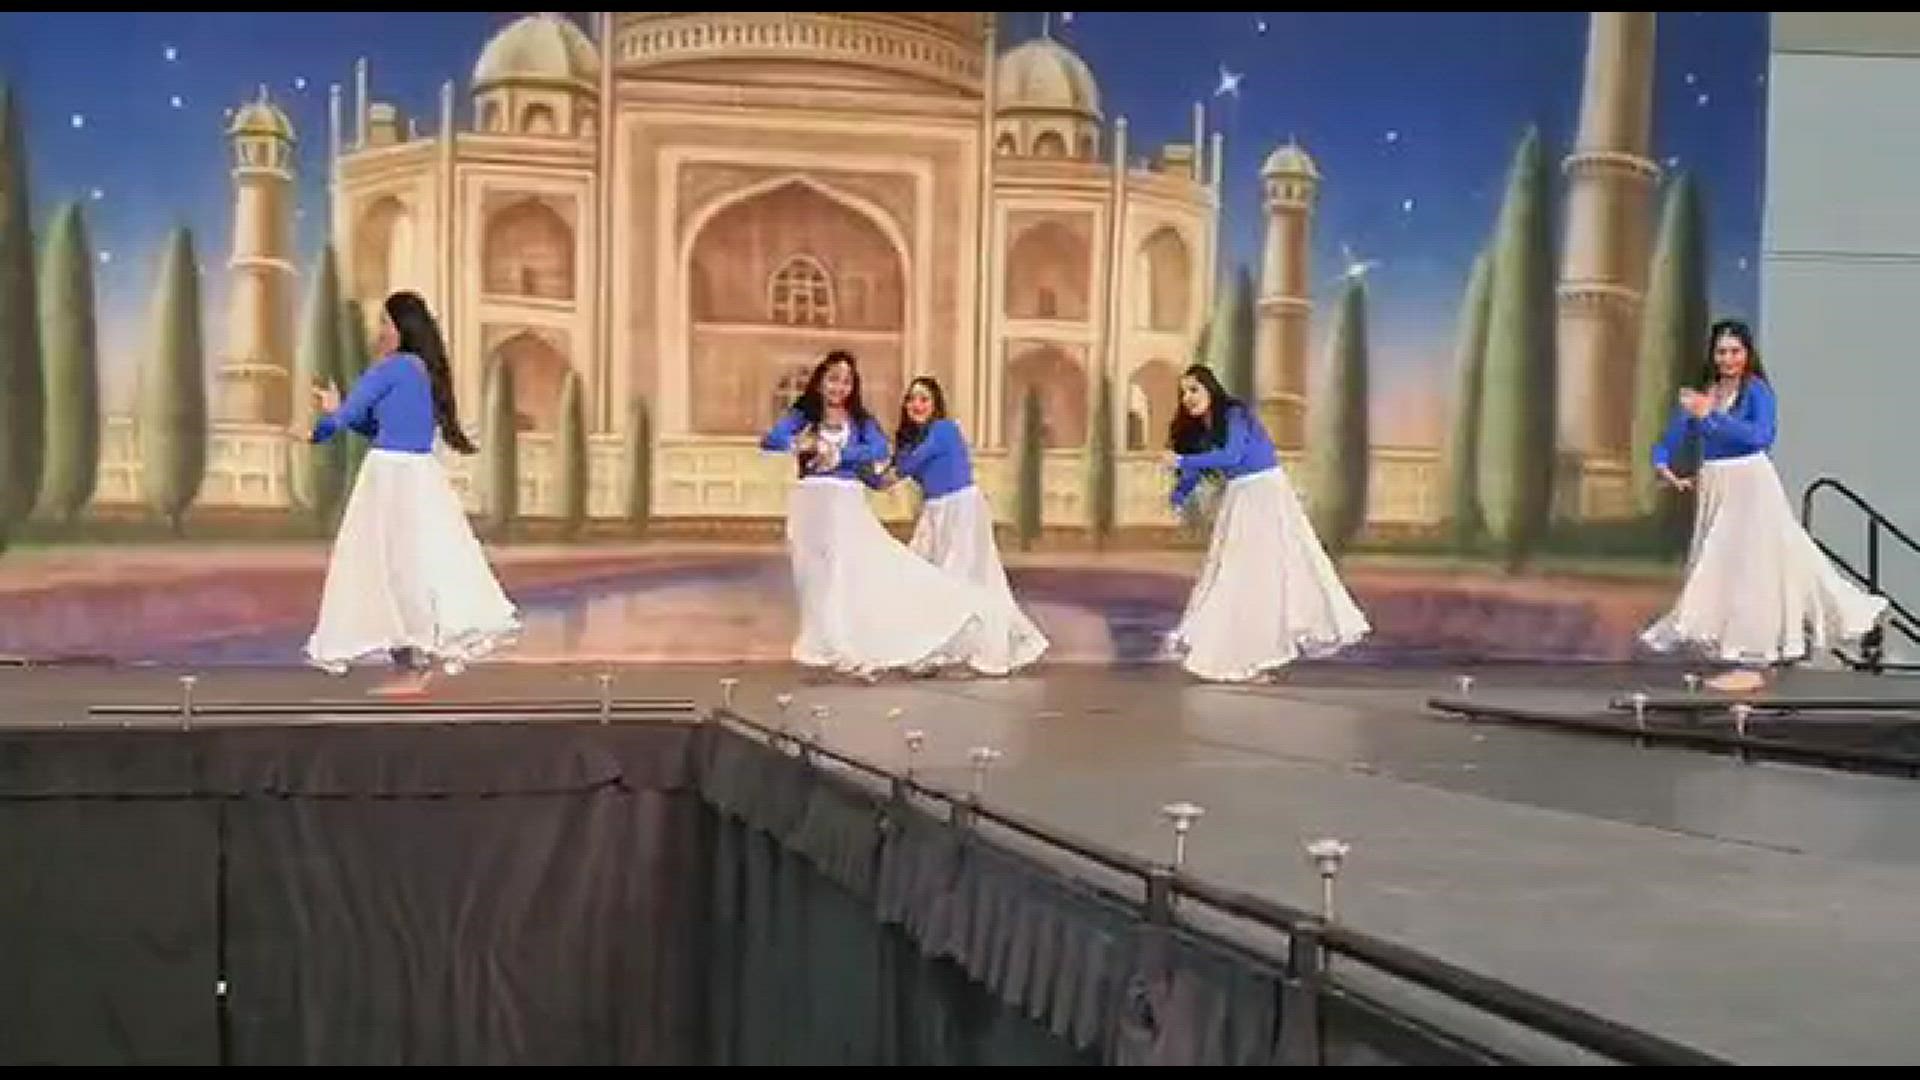 Indiafest is an annual festival in Hampton Roads that celebrates the beauty and diversity of culture. Here is a traditional Indian dance performance.